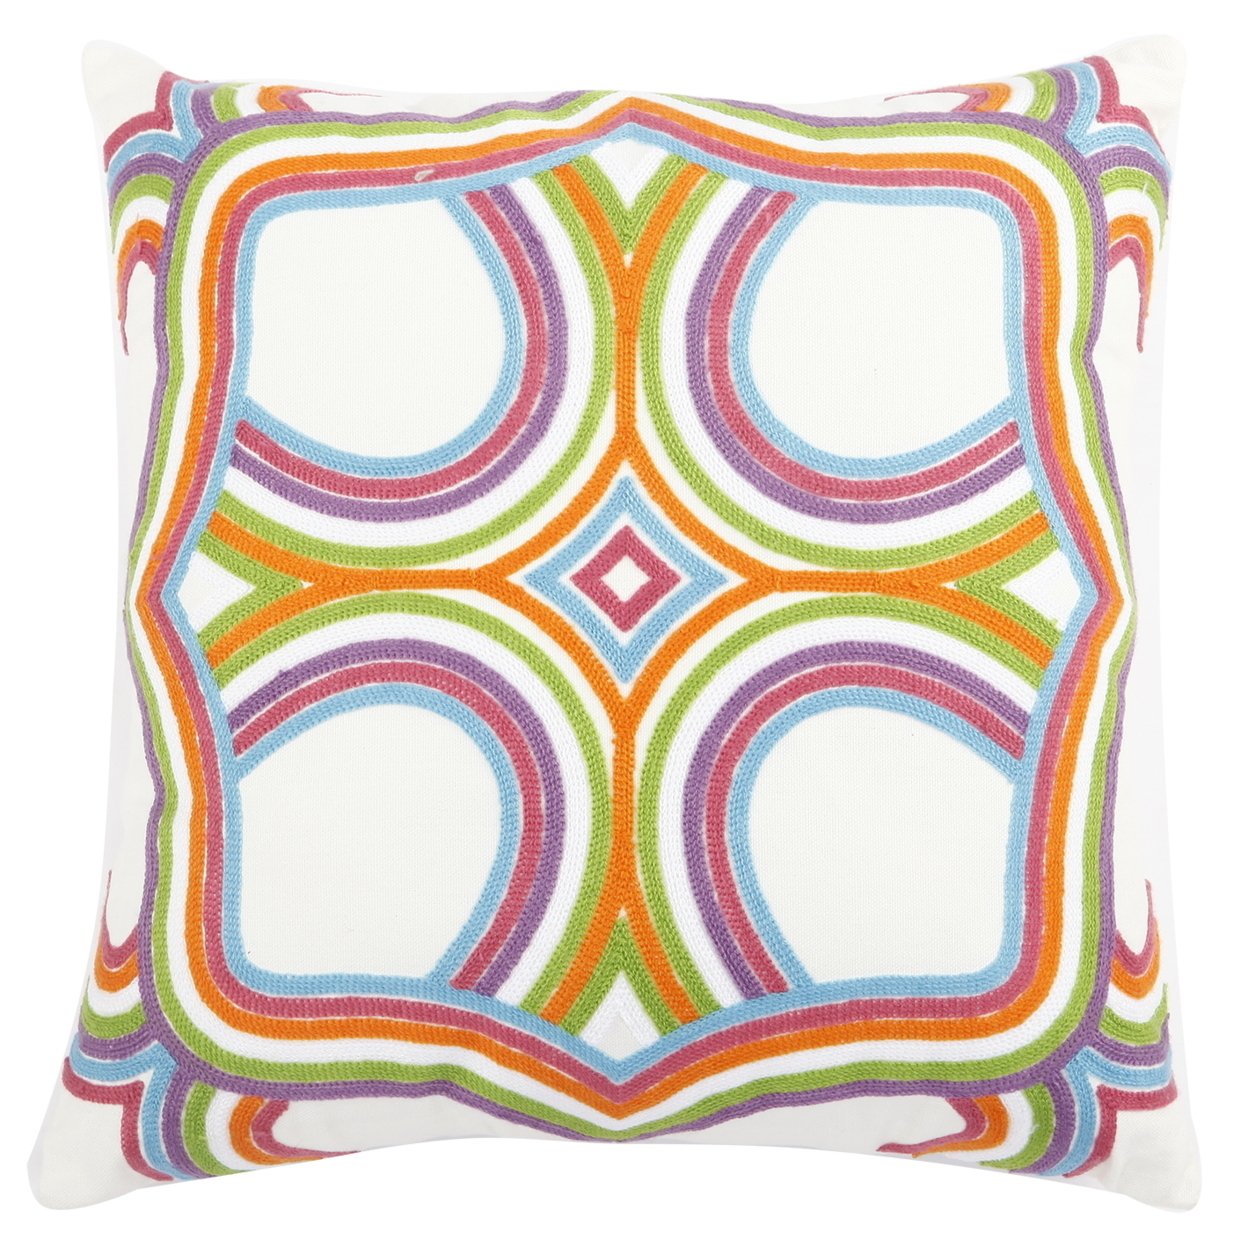 18 X 18 Inch Polyester Pillow With Celtic Knot Embroidery, Set Of 2, Multicolor- Saltoro Sherpi